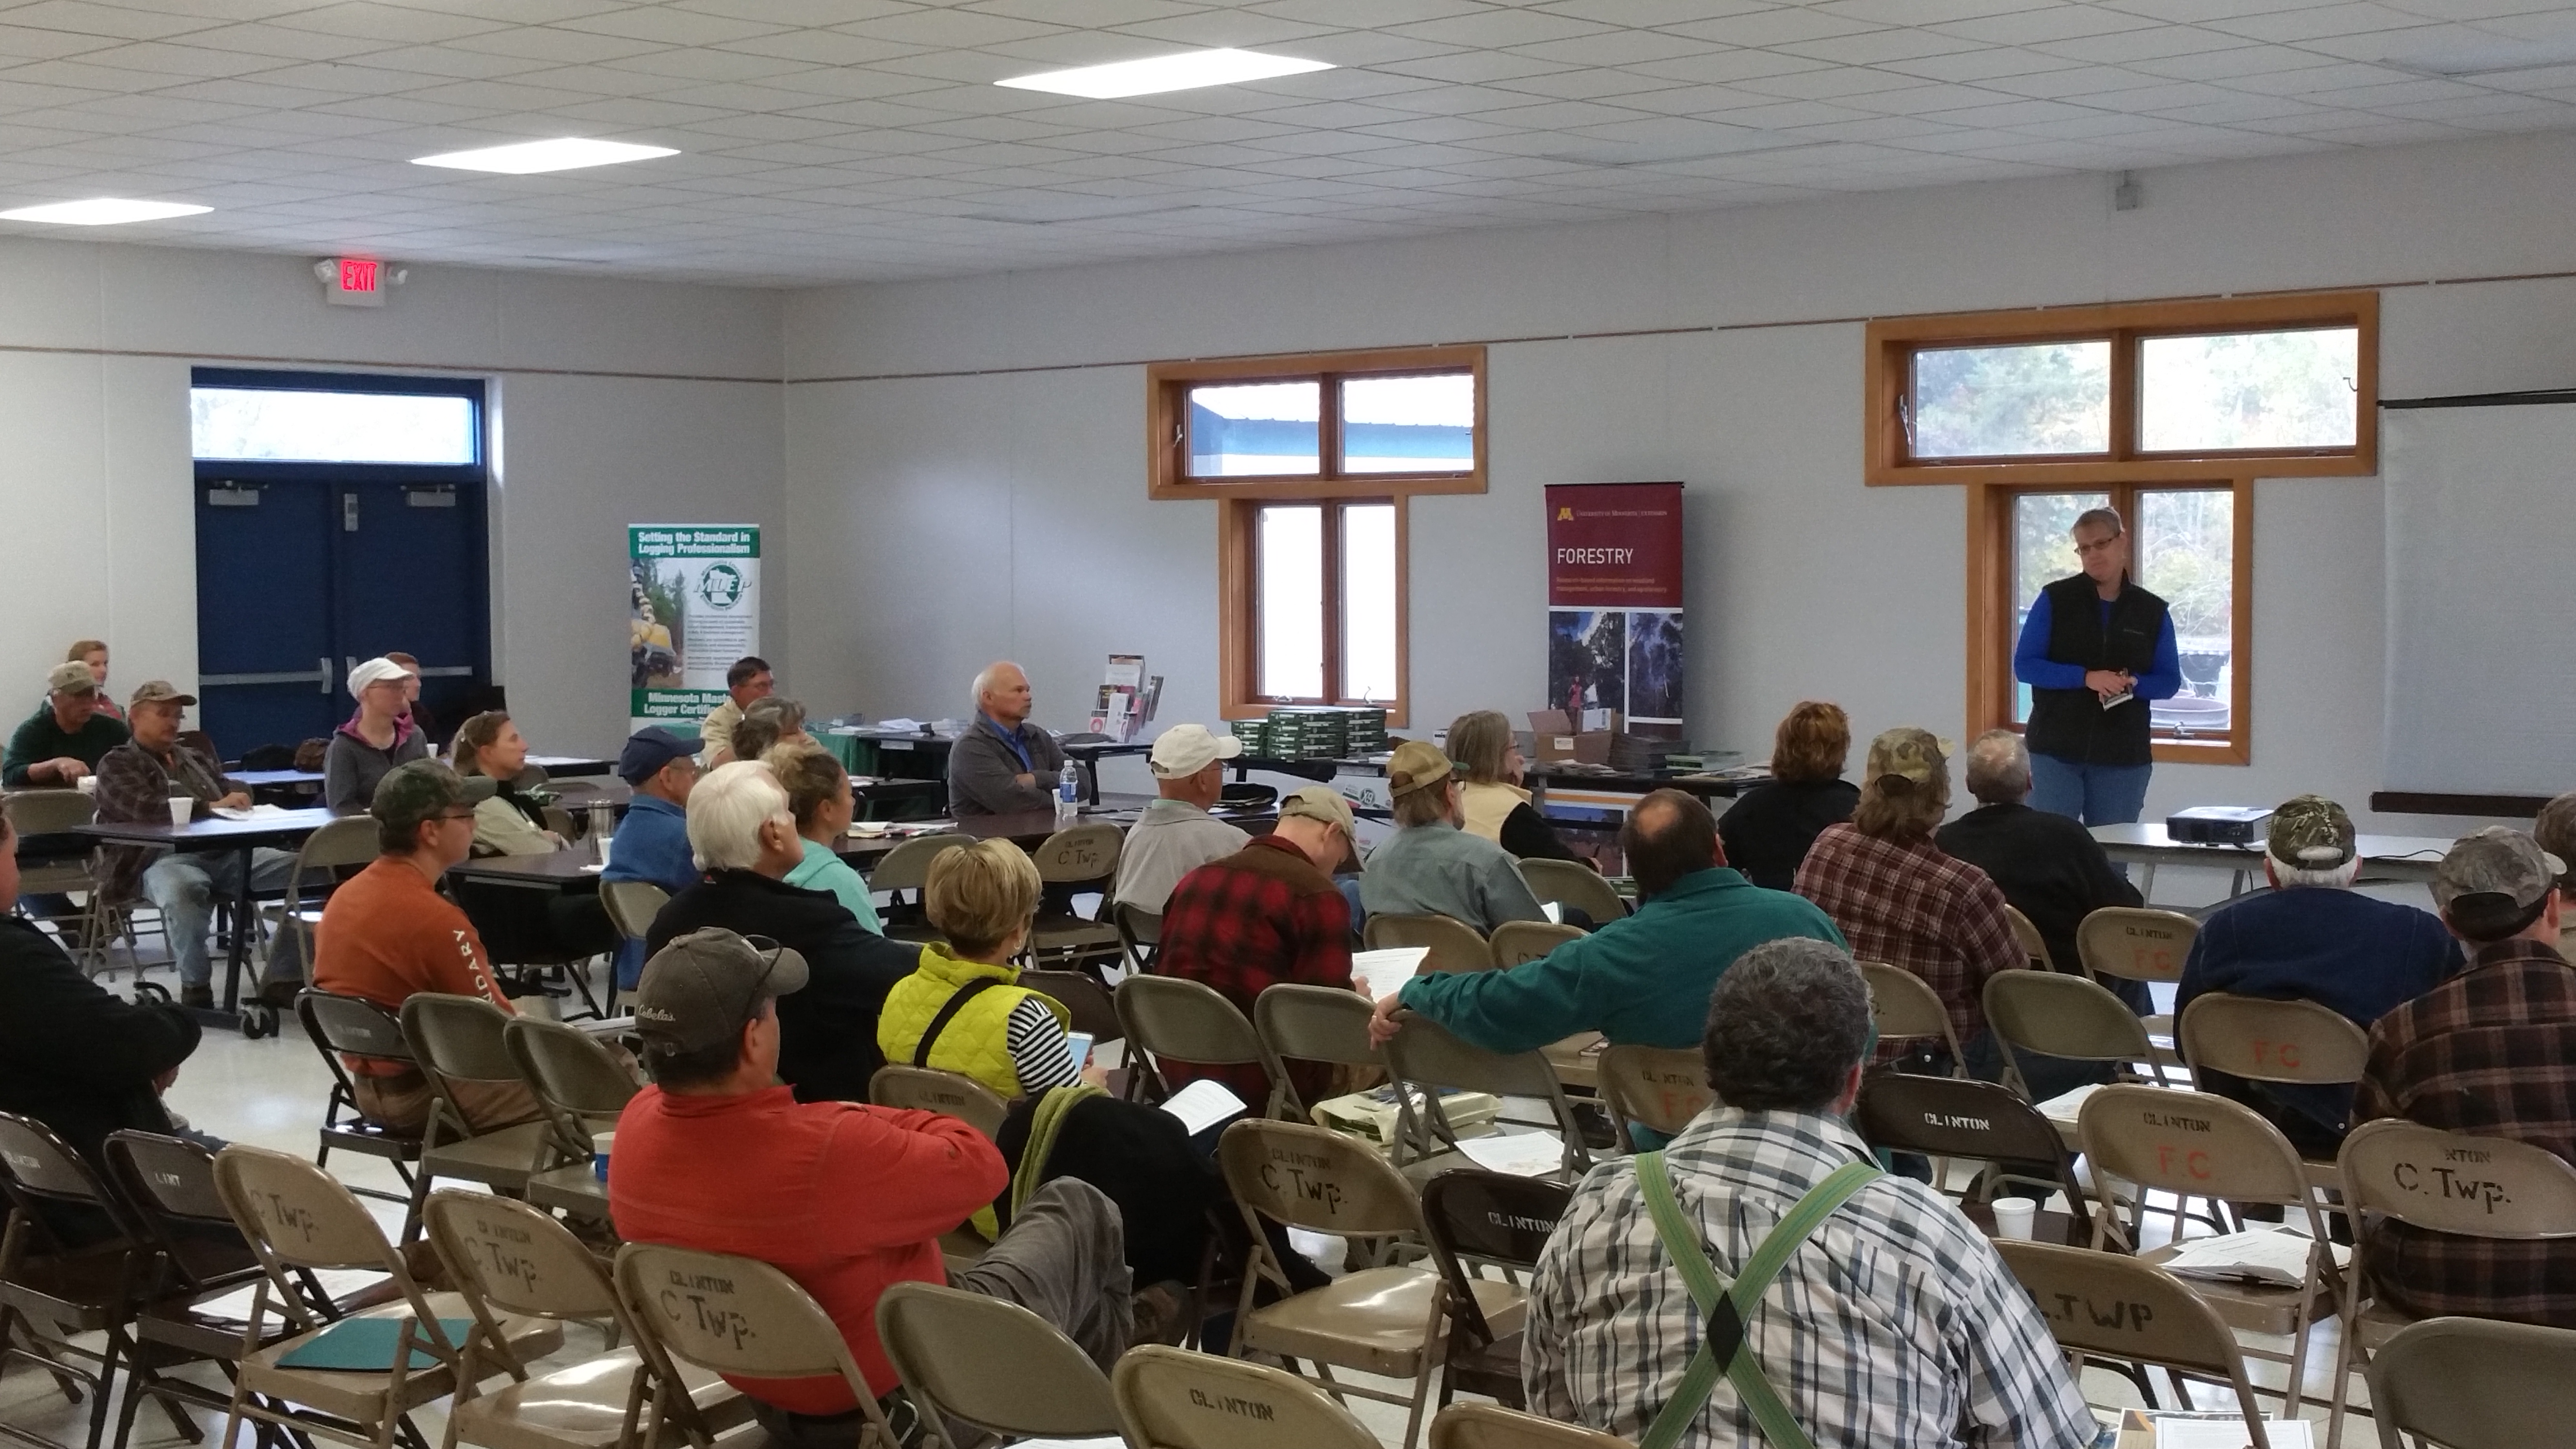 Forest landowners take part in an educational program. Photo by the author.